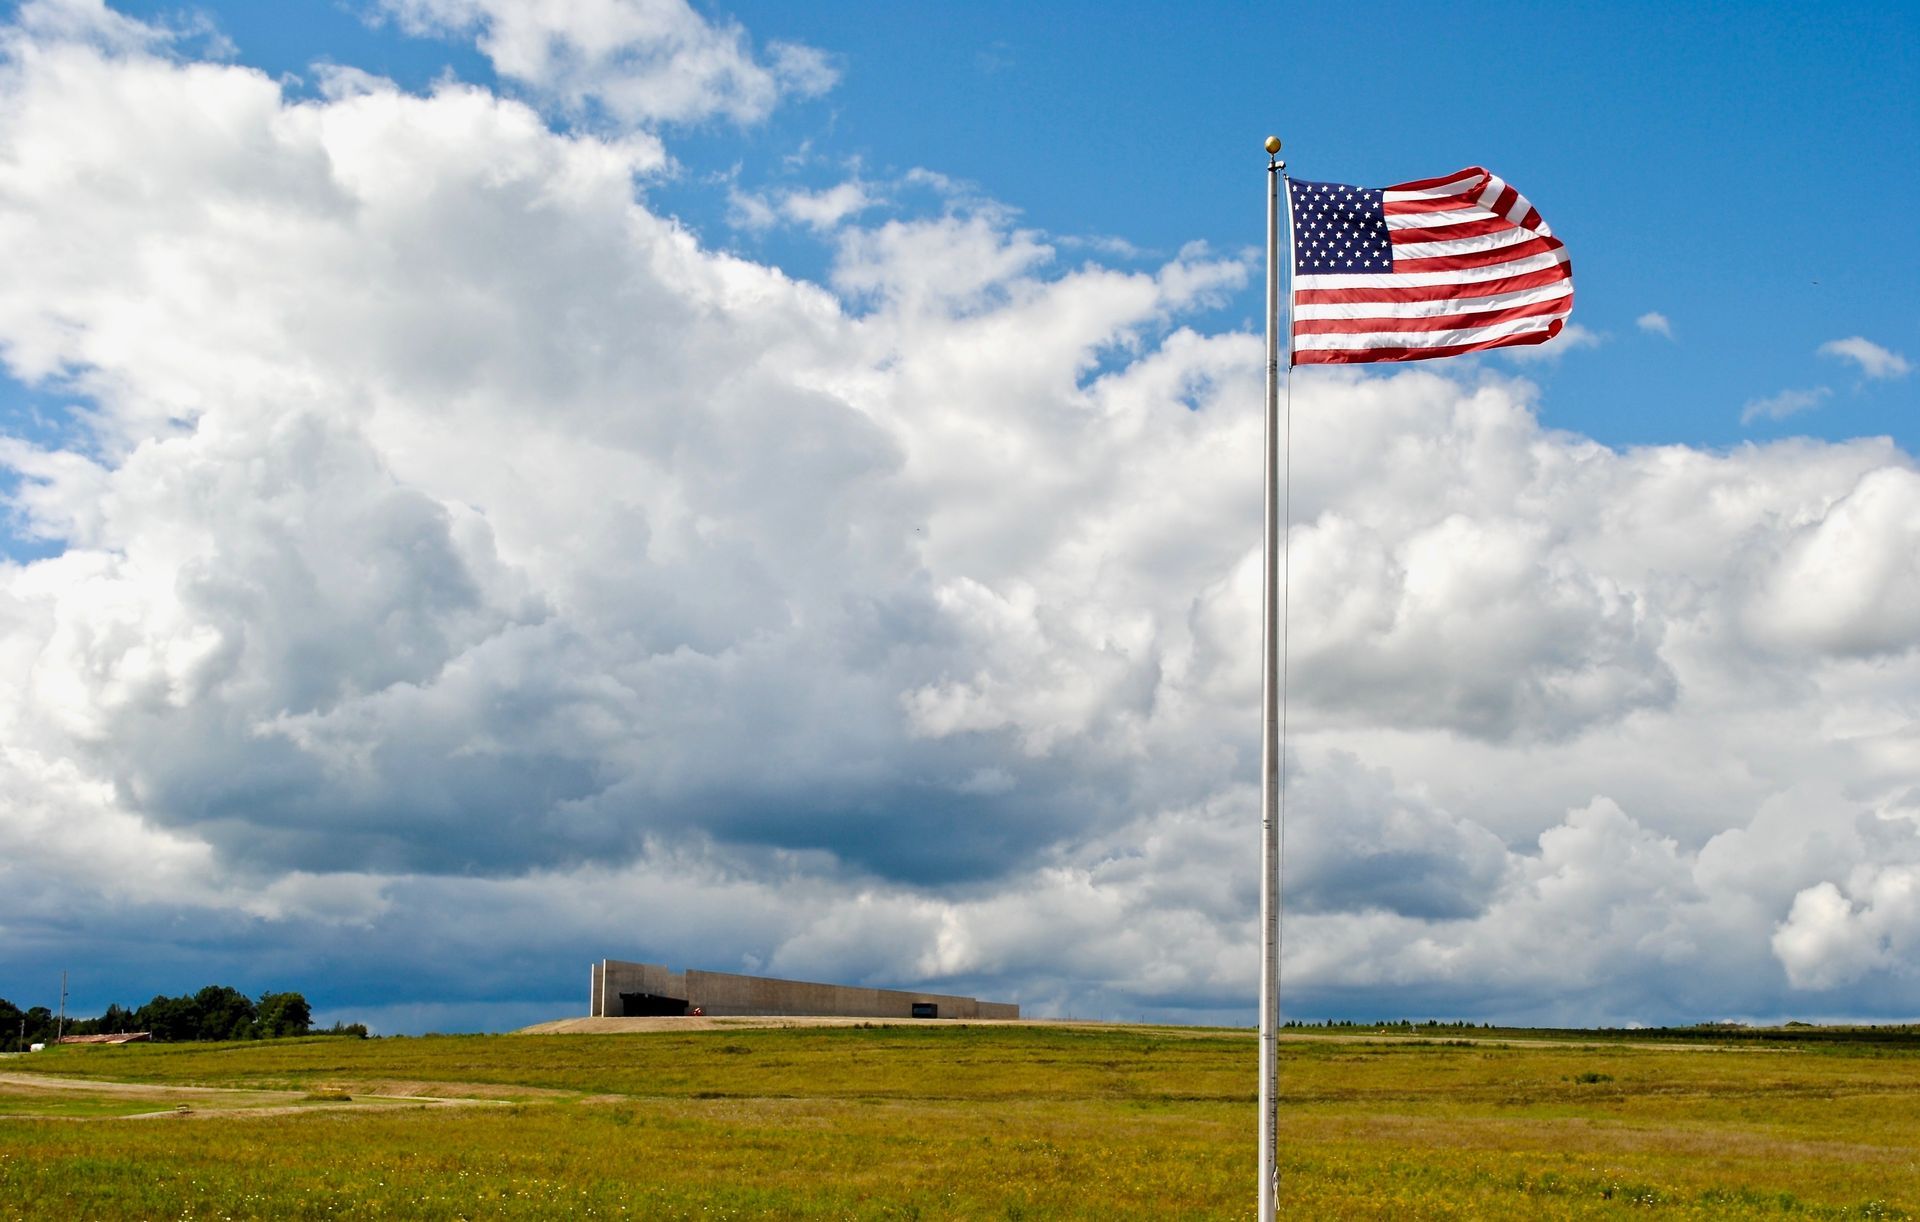 An american flag is waving in the wind in a field.